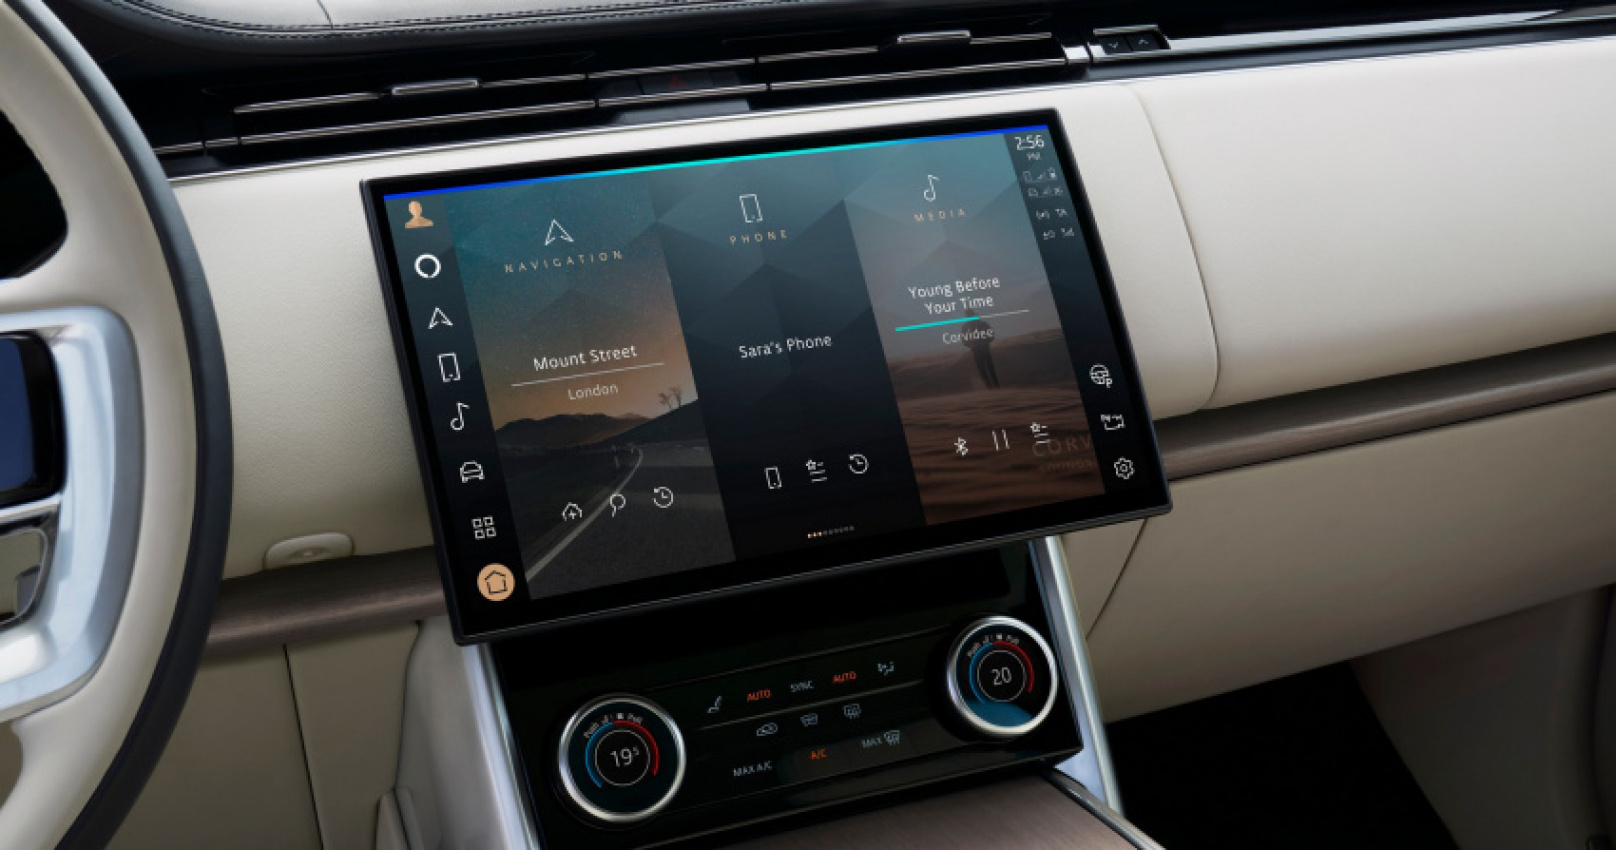 autos, cars, jaguar, land rover, news, amazon, jaguar land rover, jaguar videos, tech, video, amazon, alexa coming to more than 200,000 jaguar land rover vehicles as an over-the-air update